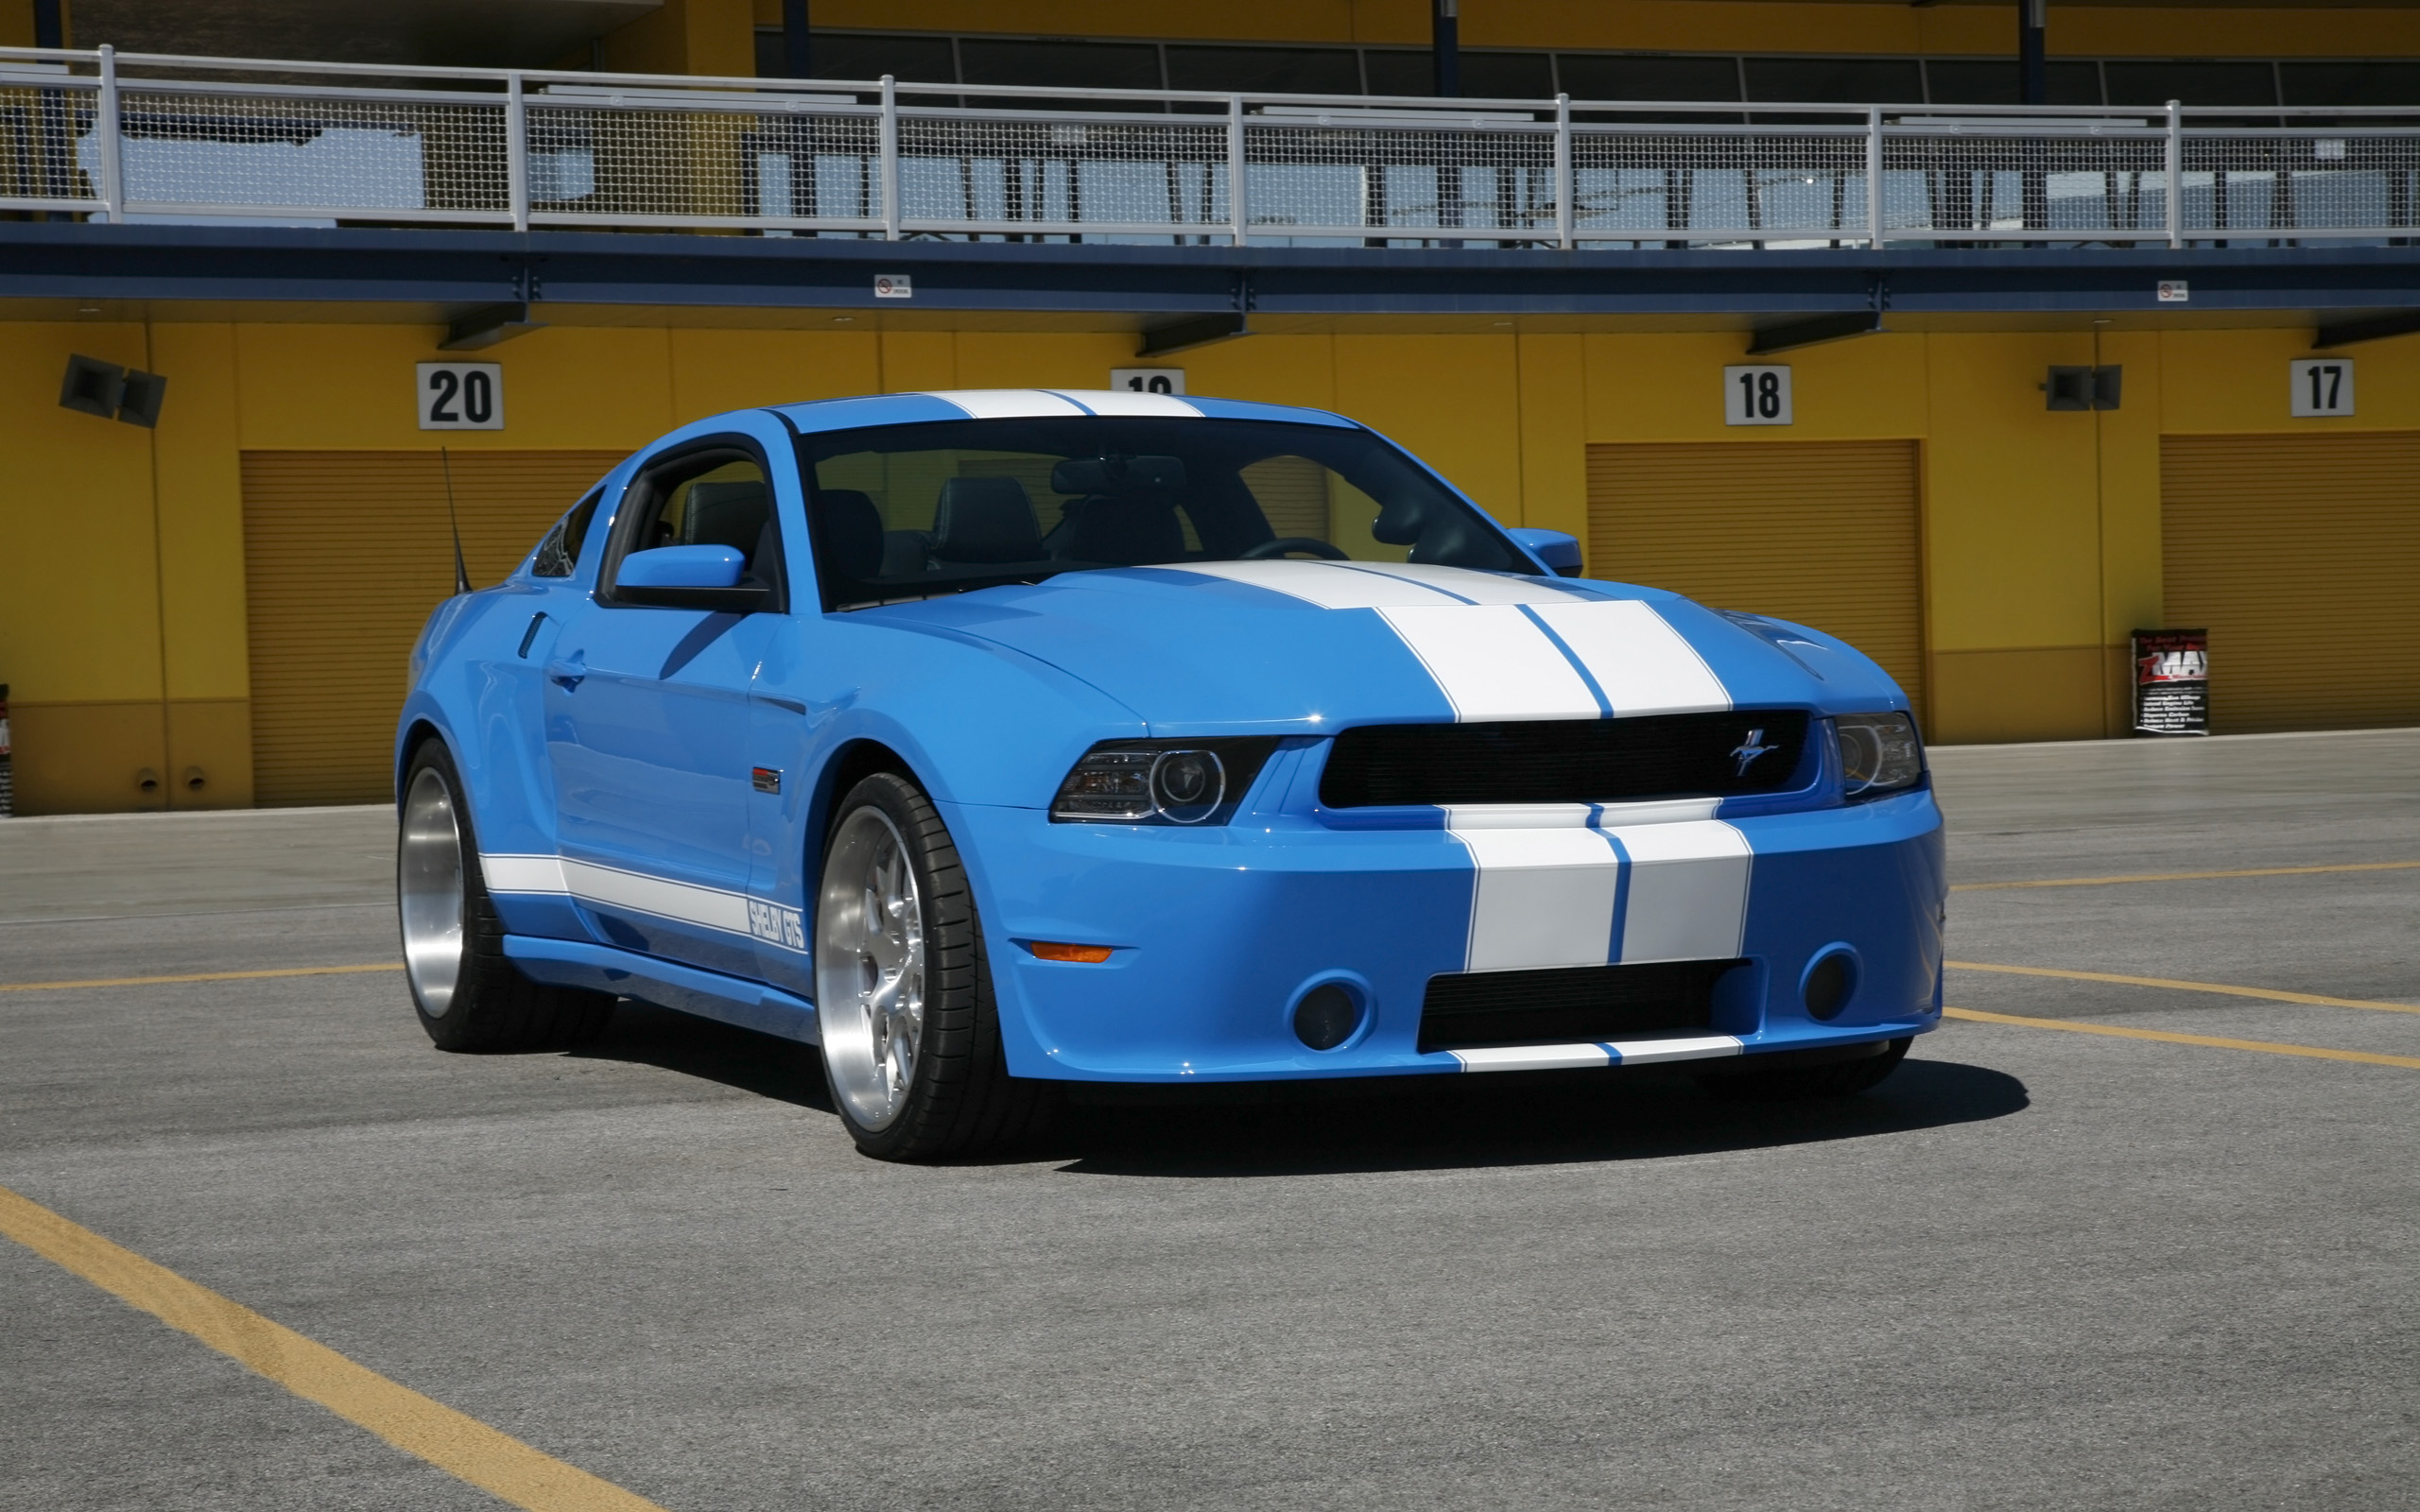 2013, Shelby, Gts, Ford, Mustang, Muscle, Supercar, Hm Wallpaper